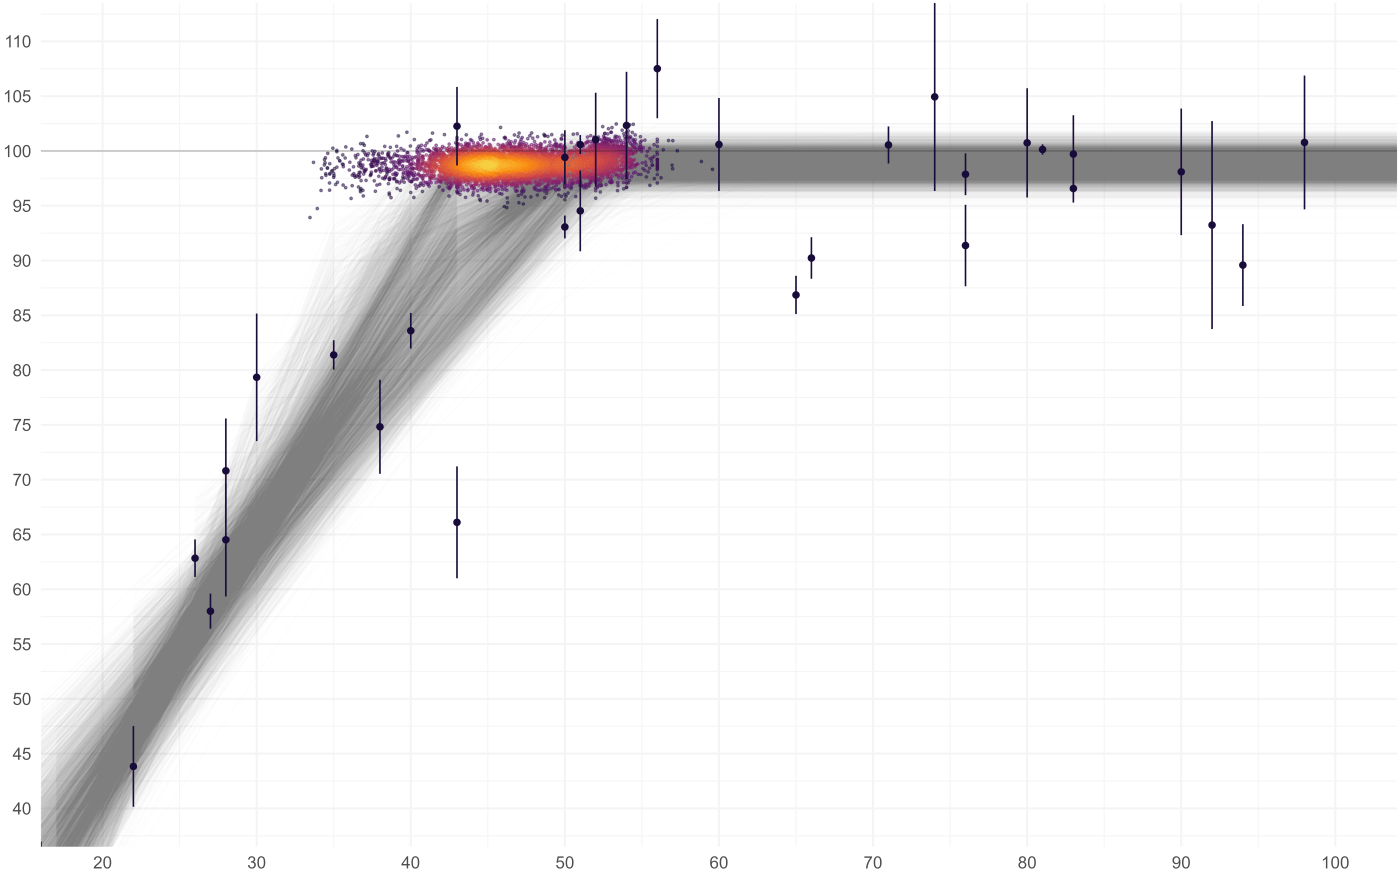 Visualization of the linear-plateau break point on another dataset showing the variation estimated by thousands of bootstraps.